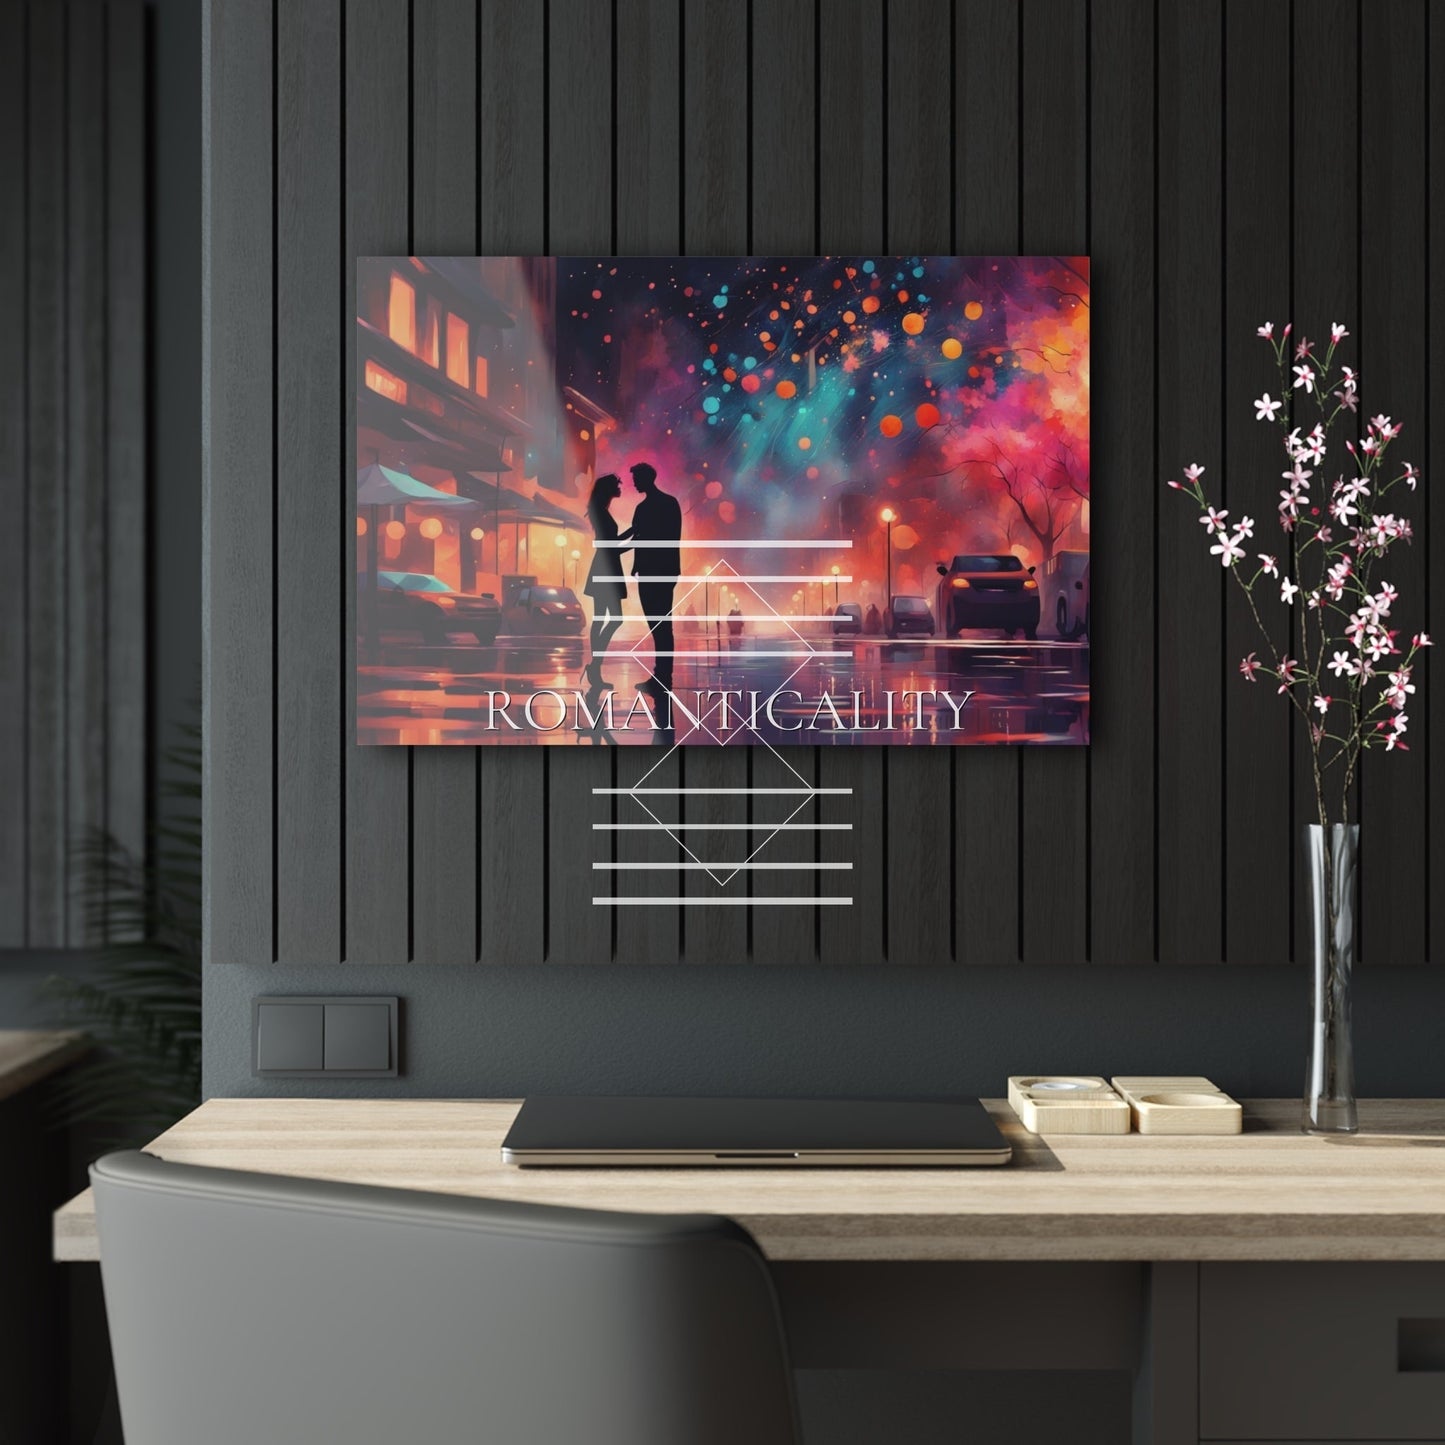 The Night We Met -M/F Couple - Love in All Forms Collection - Acrylic Art Print-Art with Depth-Romantic Couple Bedroom Decor - Romance & Art